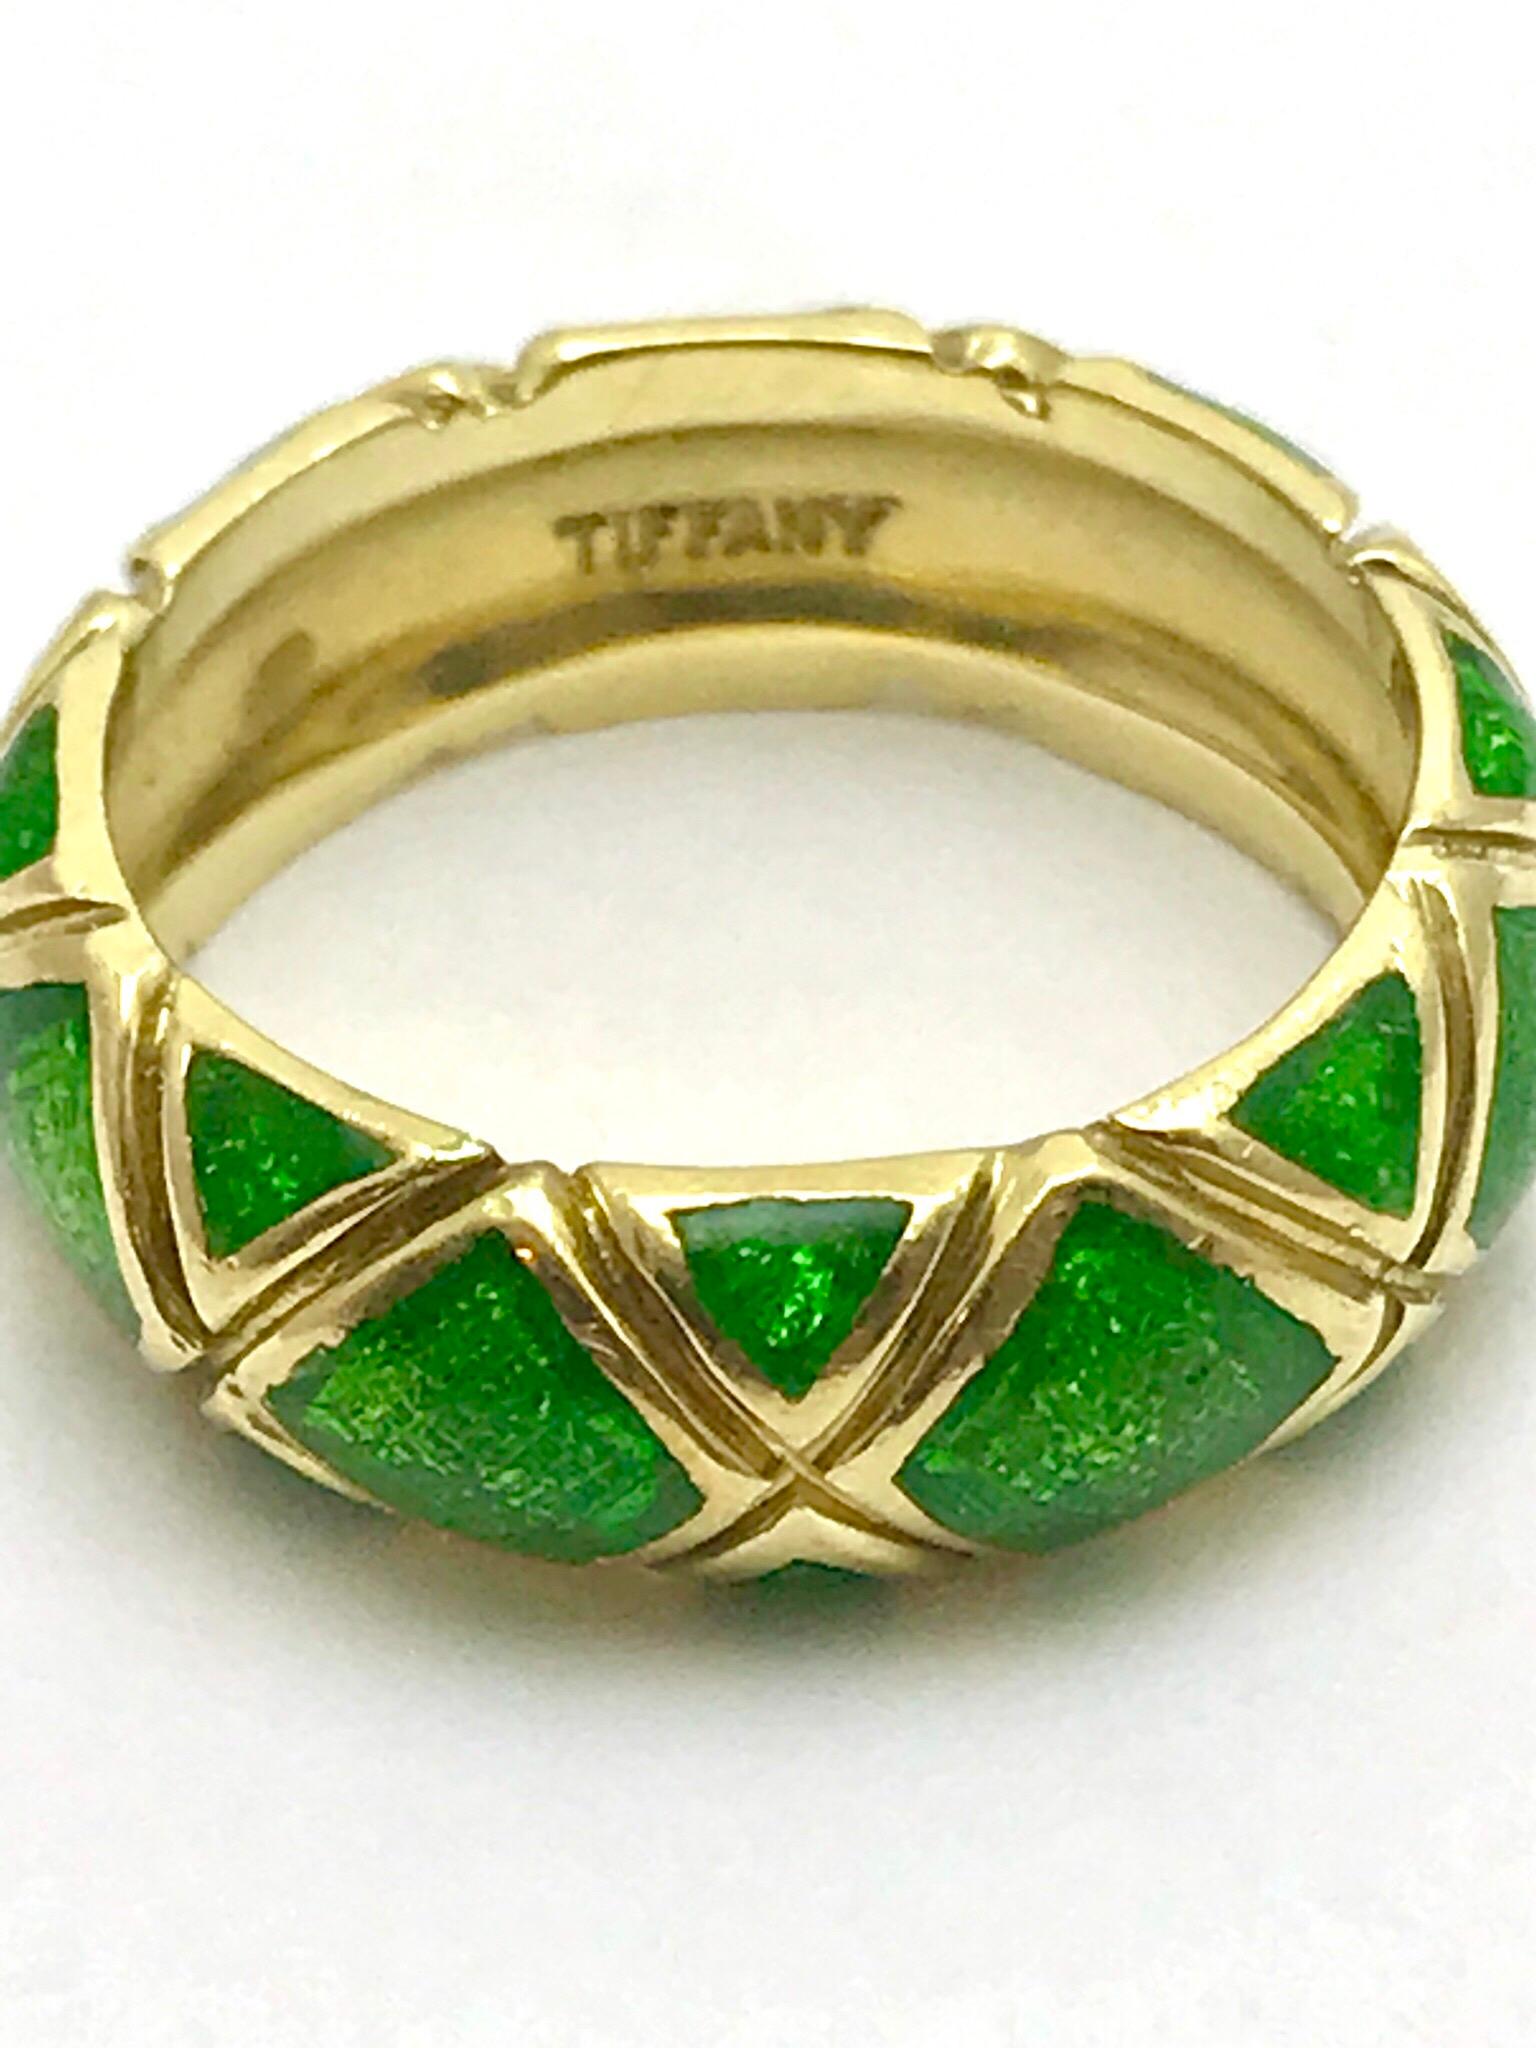 A Tiffany & Co. green enamel and 18 karat yellow gold band.  The band is designed with an 